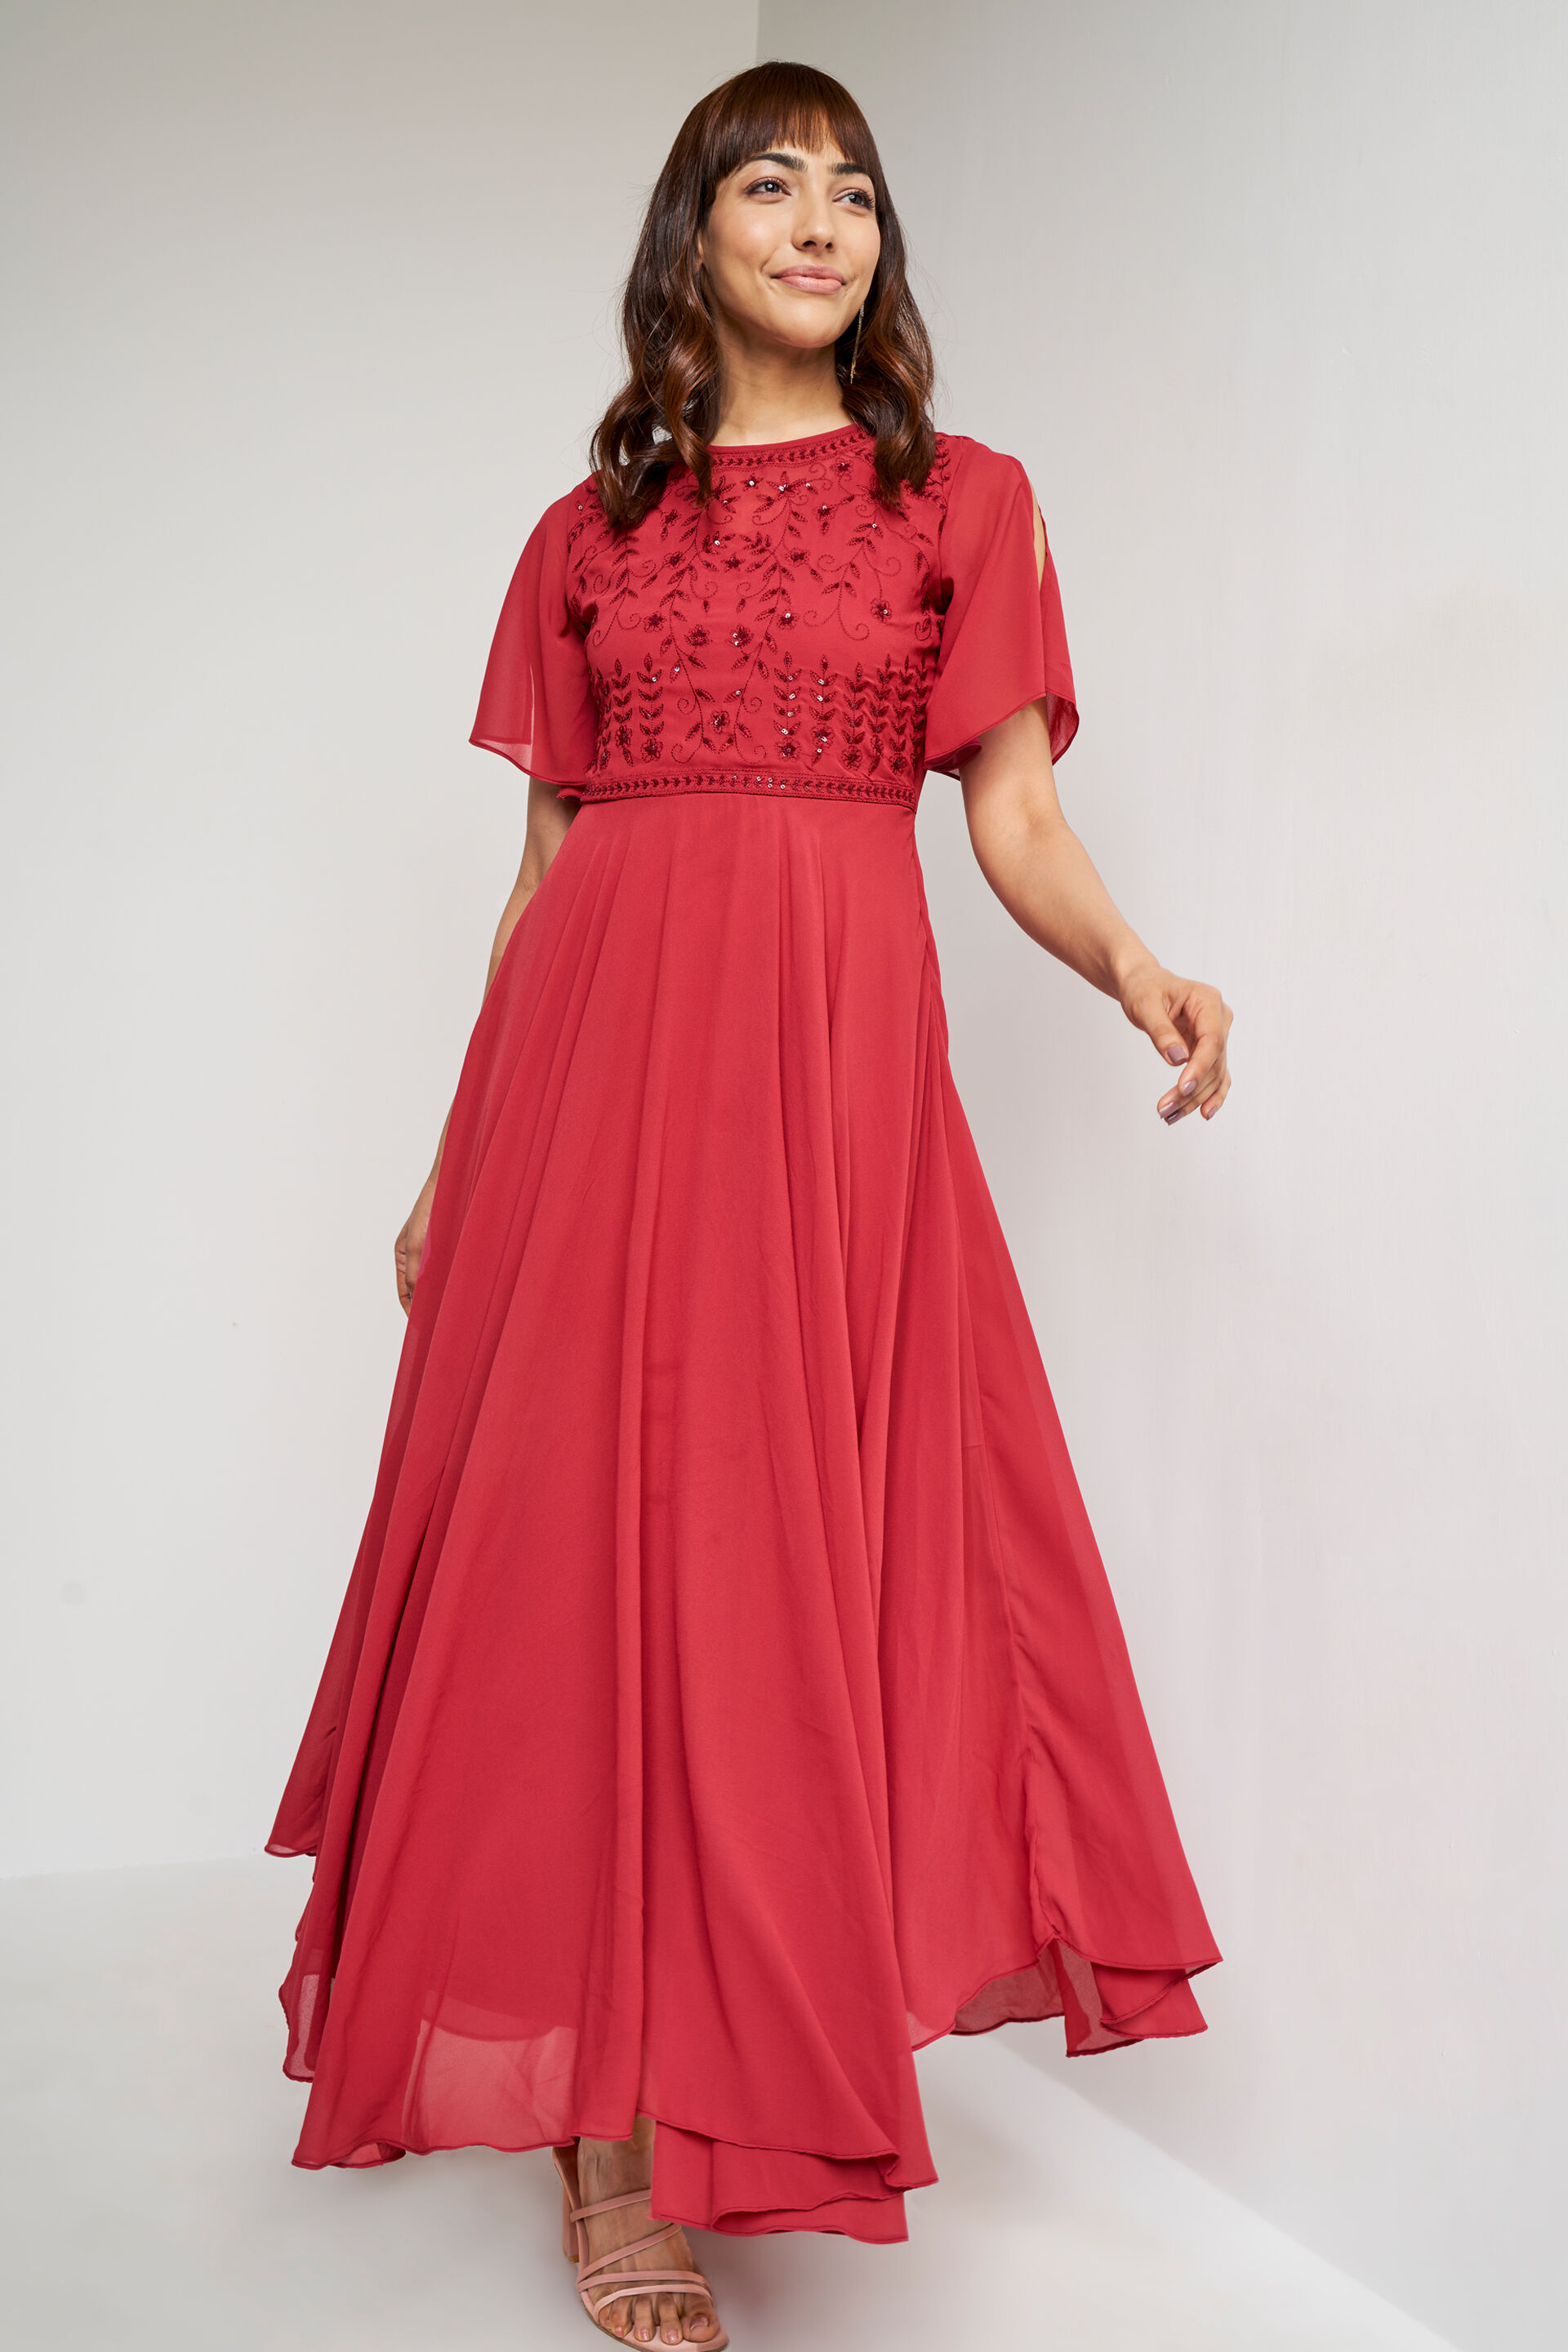 Goti's Flared/A-line Gown Price in India - Buy Goti's Flared/A-line Gown  online at Flipkart.com